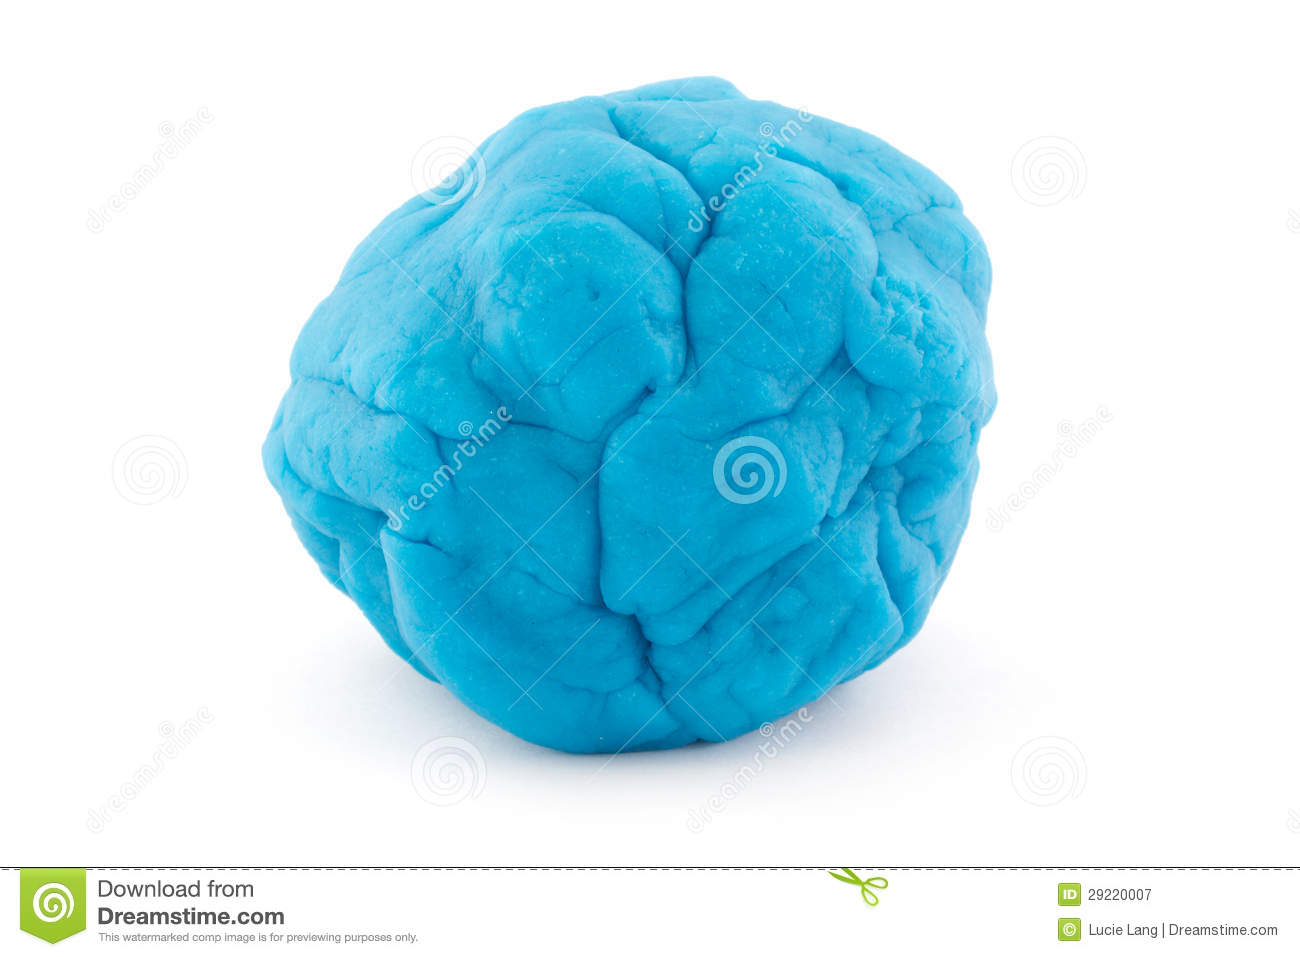 Ball Of Blue Play Dough On White Royalty Free Stock Photography